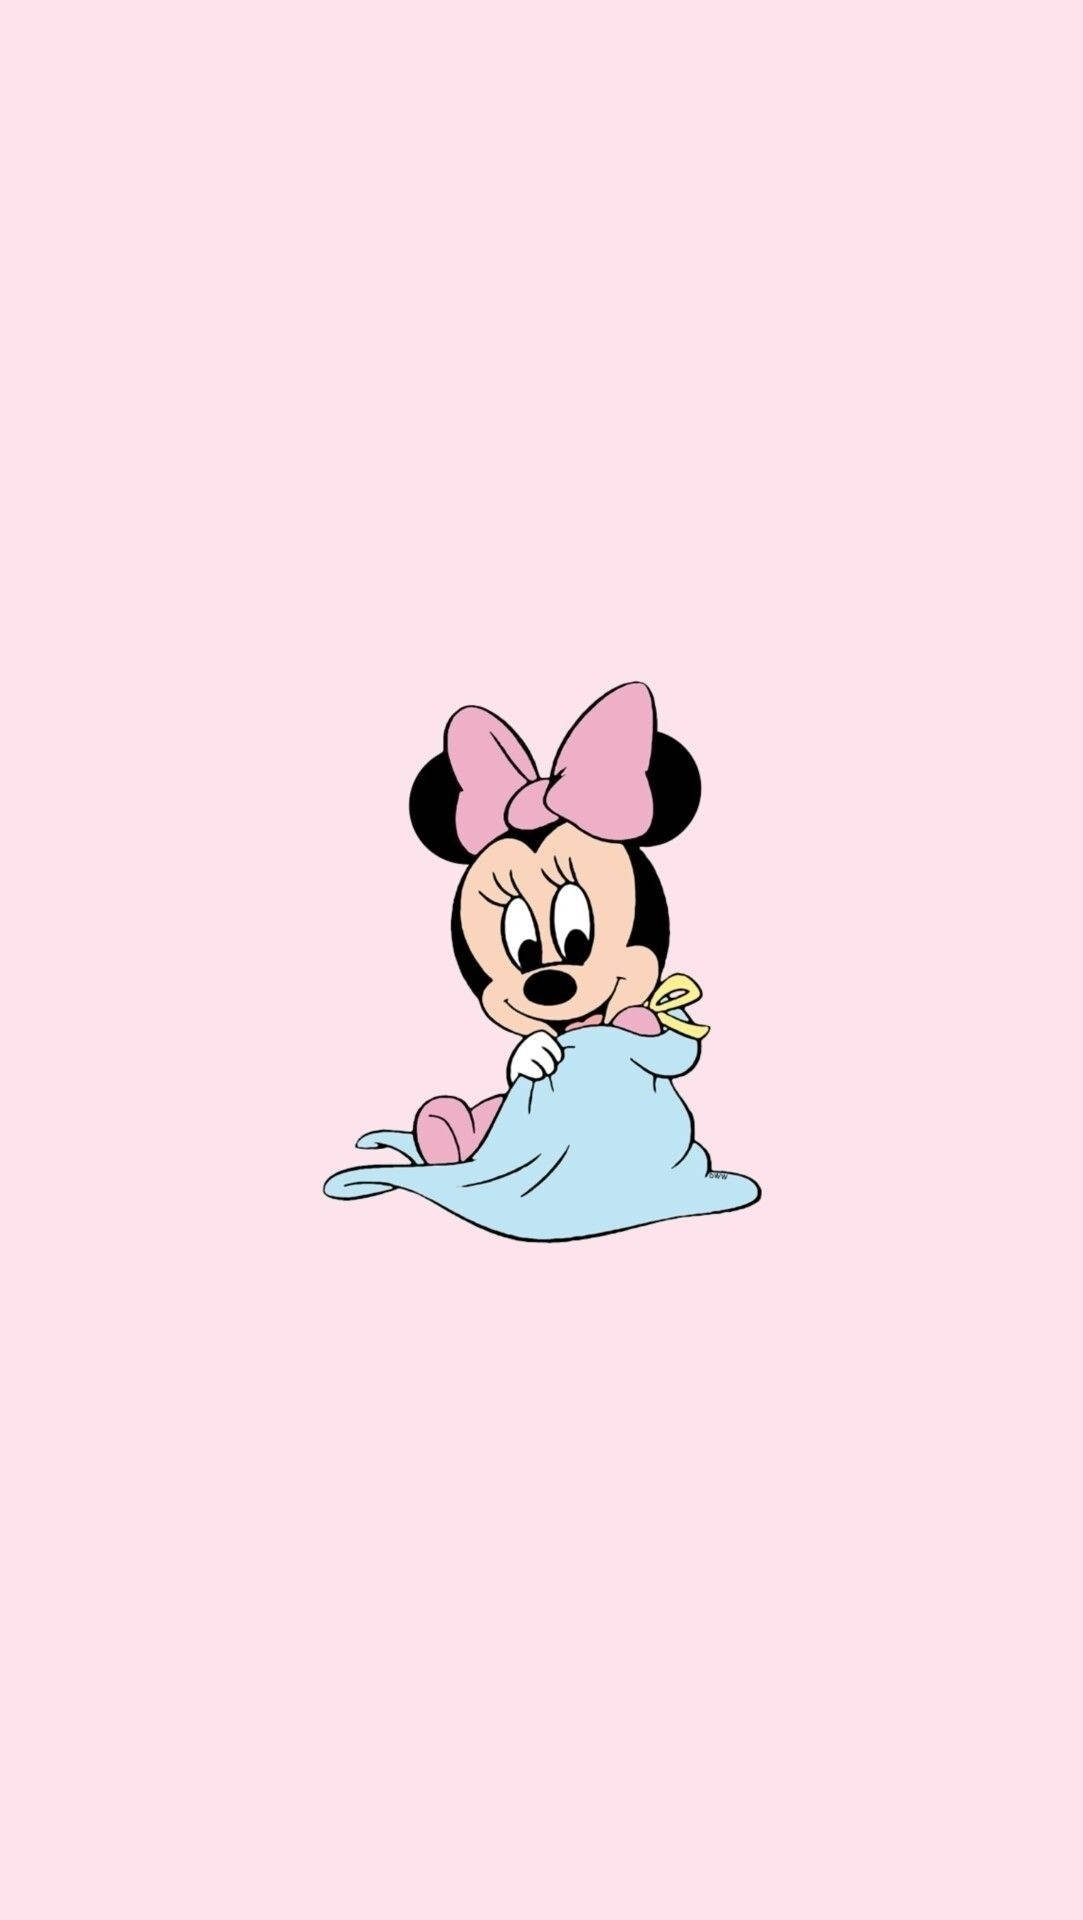 Minnie Mouse Live Wallpaper for Your Phone - free download